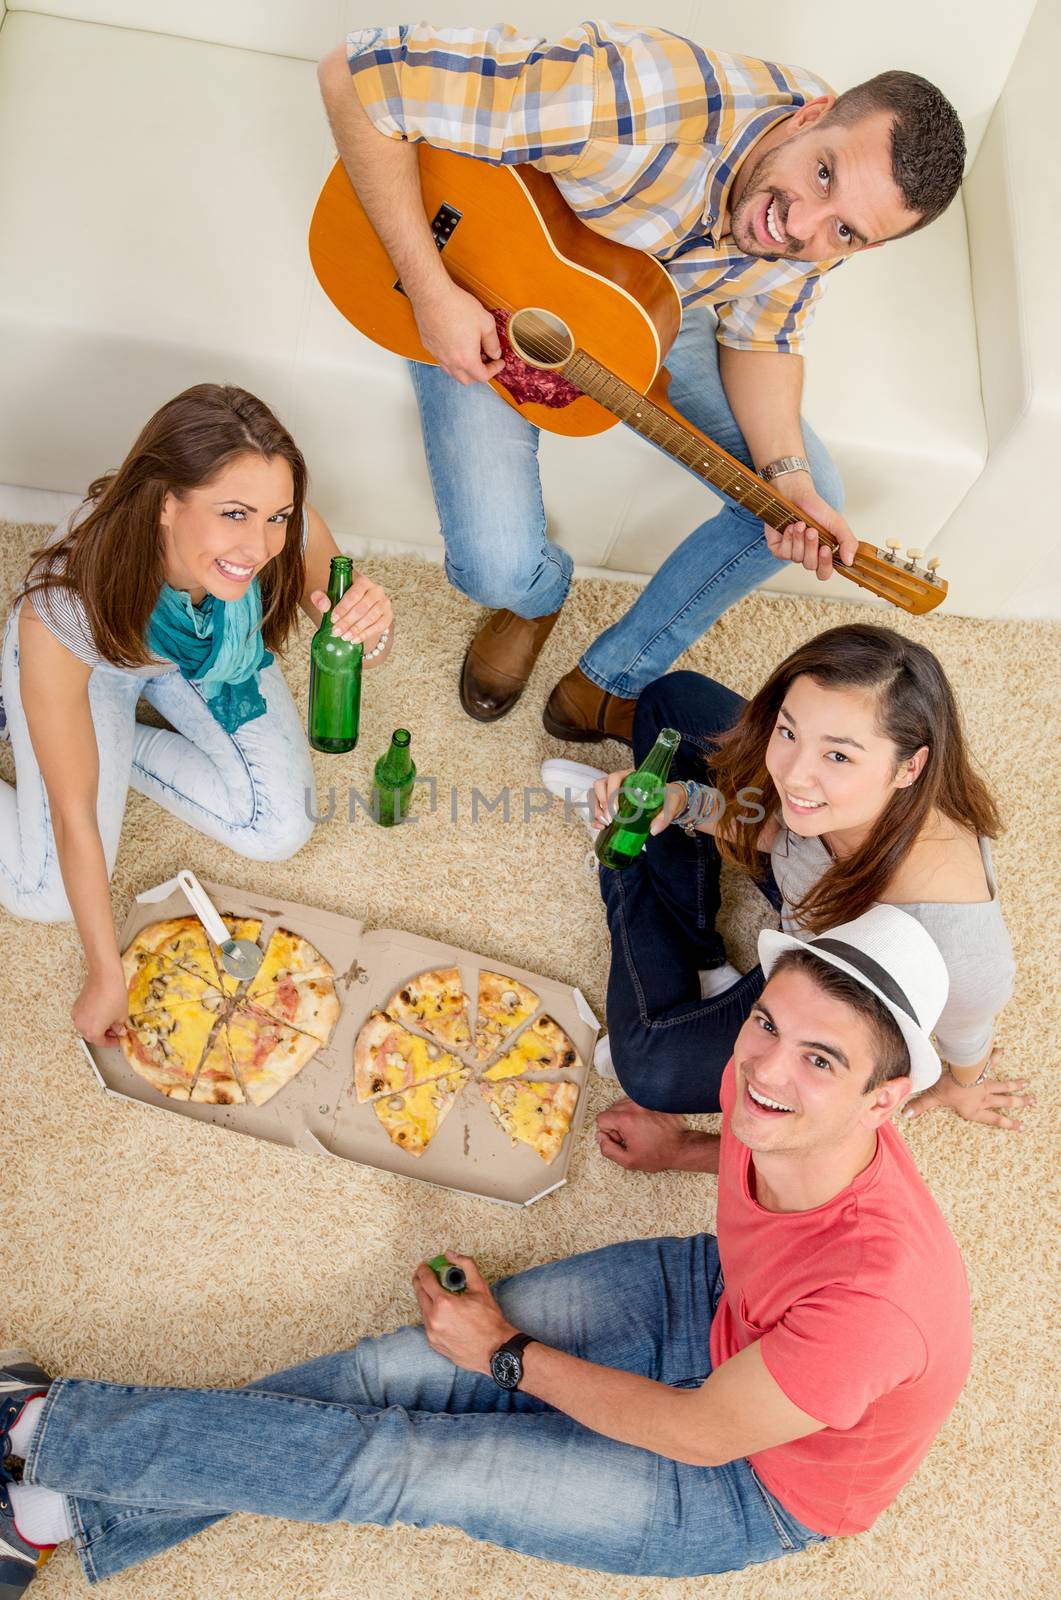 Four cheerful friends enjoing with guitar in an apartment. They drinking beer and eating pizza. Looking at camera.